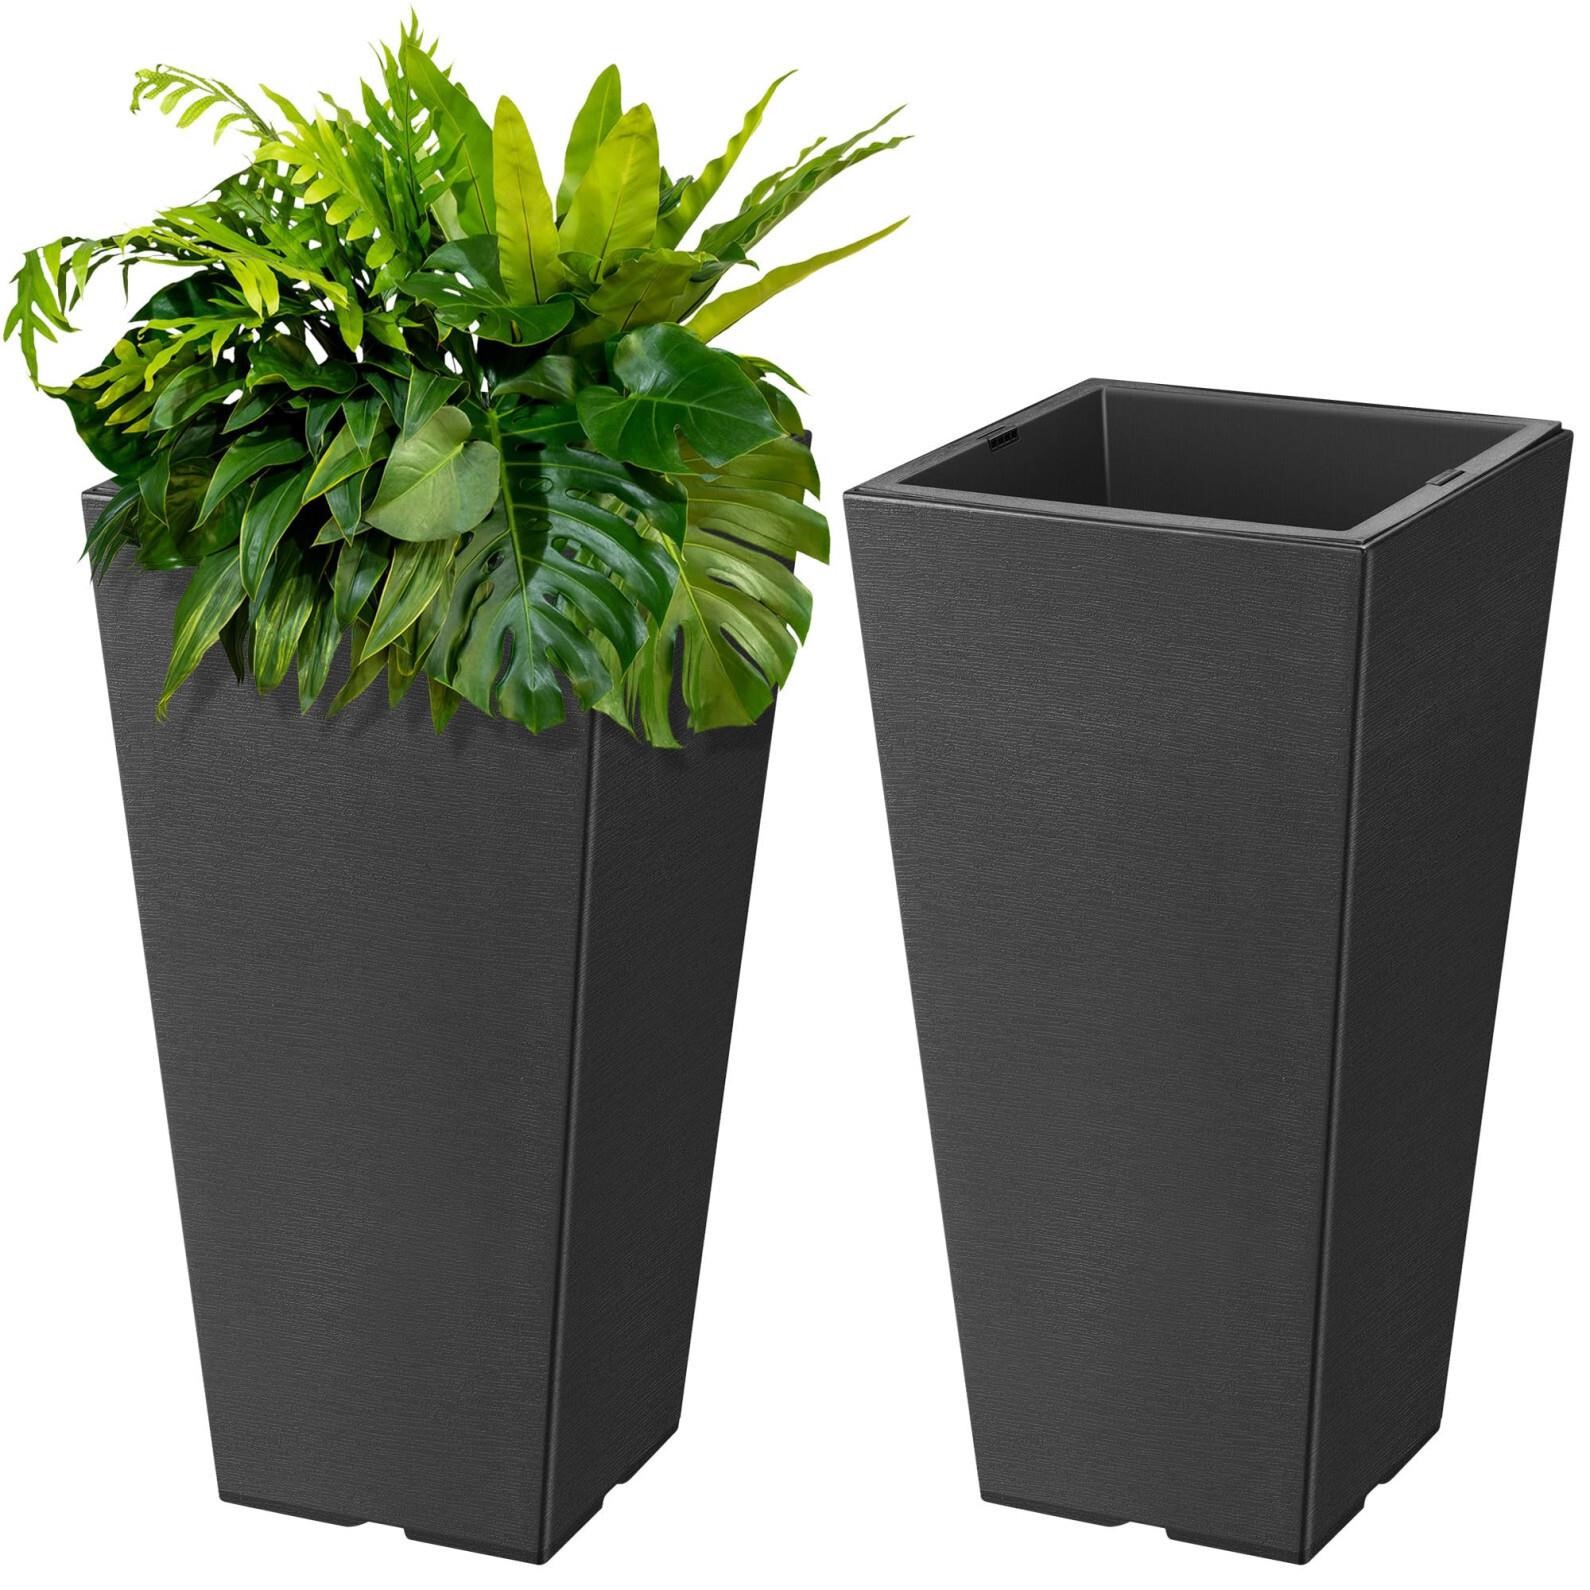 Rengue 22.6" Tall Outdoor Planters, Set of 2 Large